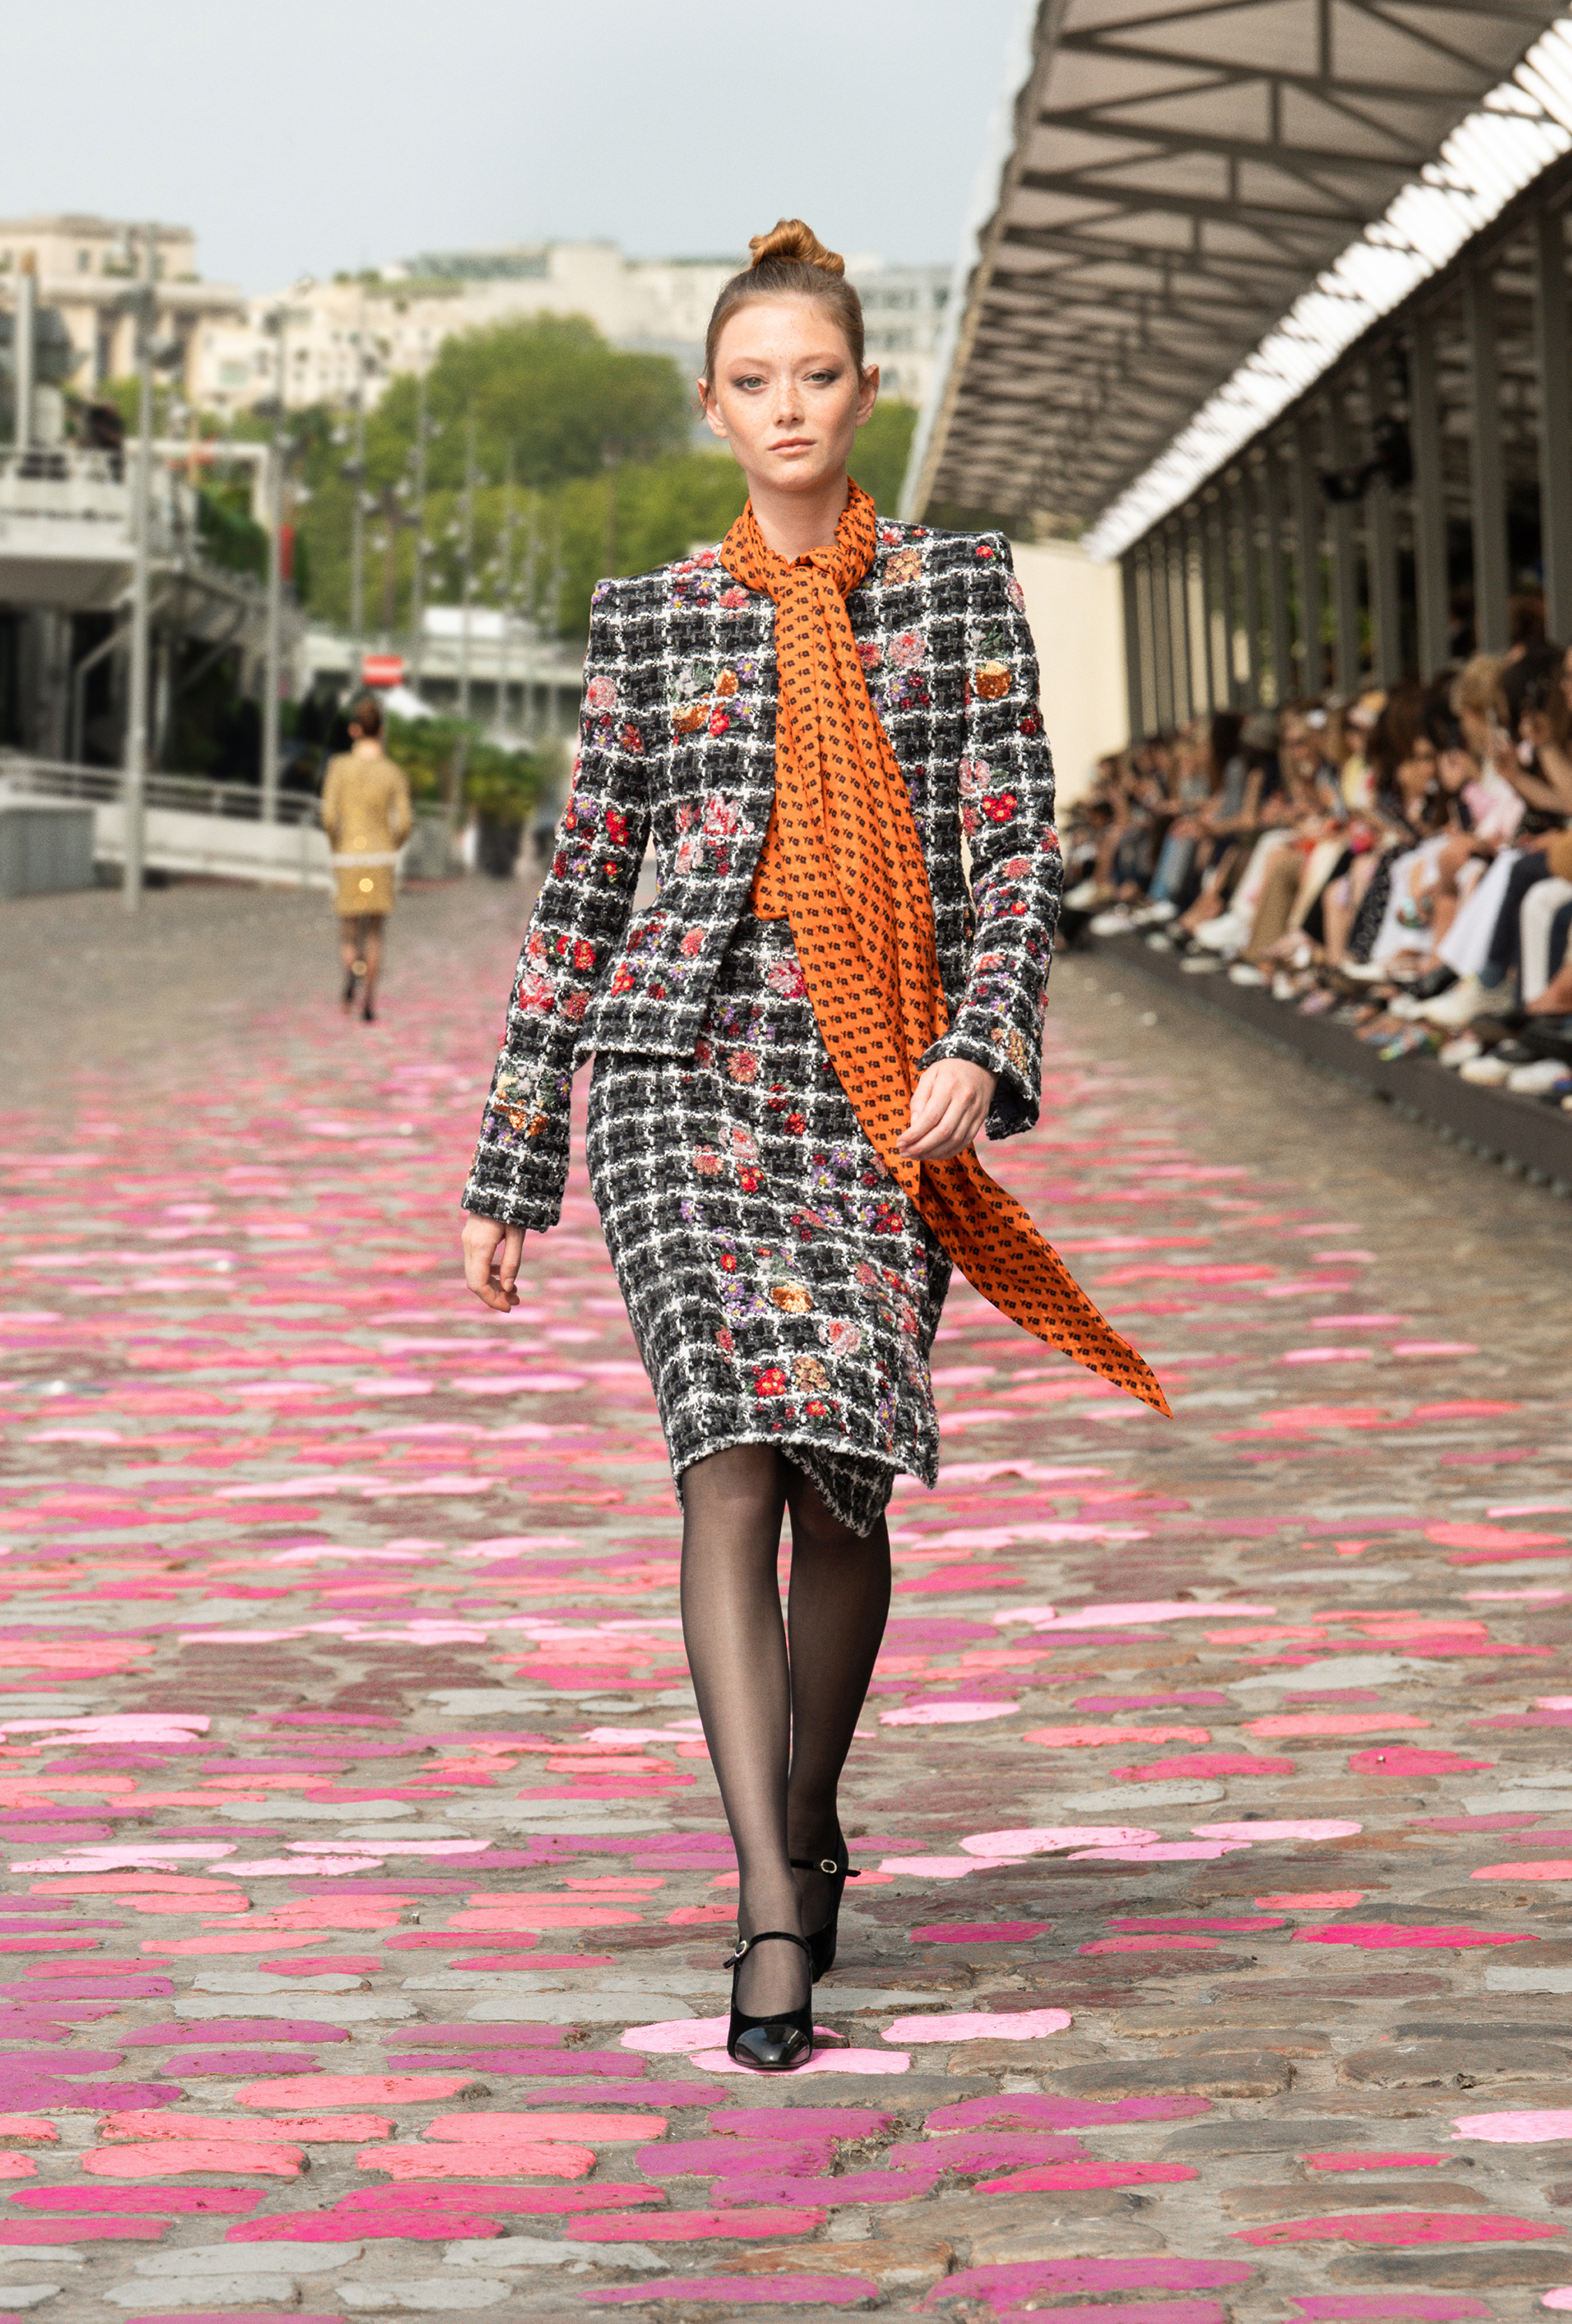 Culture and easy elegance grace Chanel's autumn/winter catwalk, Chanel